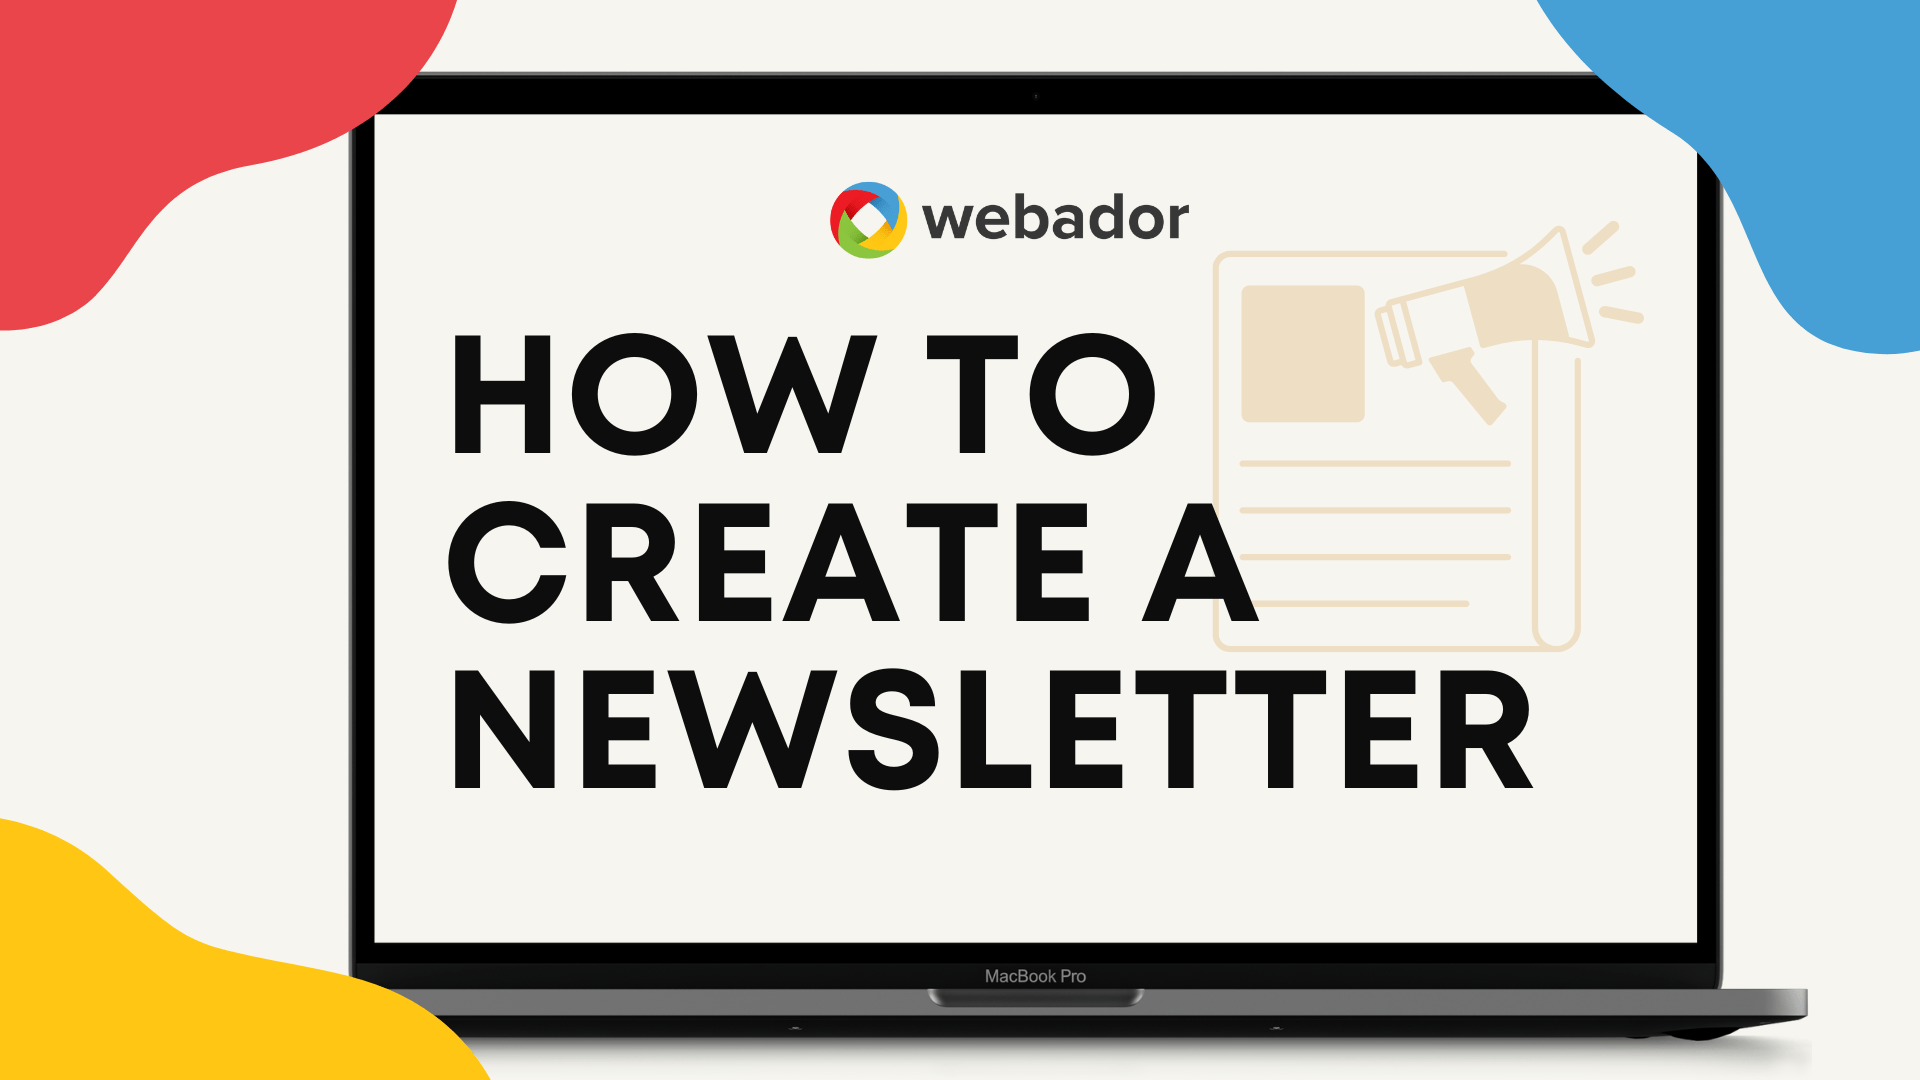 How to create a newsletter